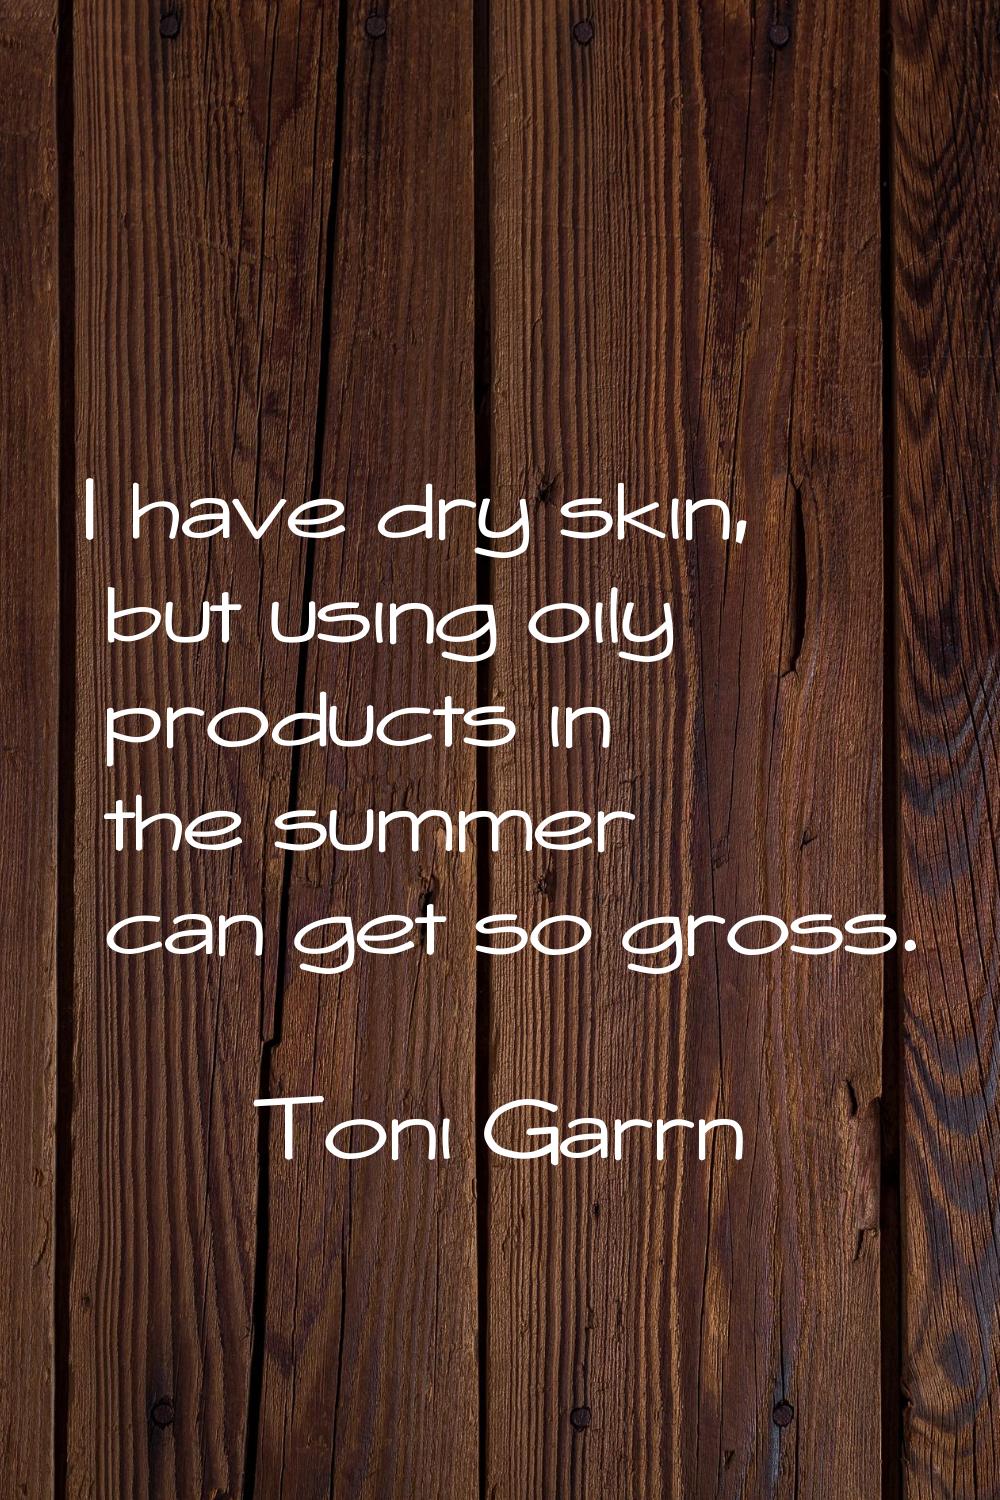 I have dry skin, but using oily products in the summer can get so gross.